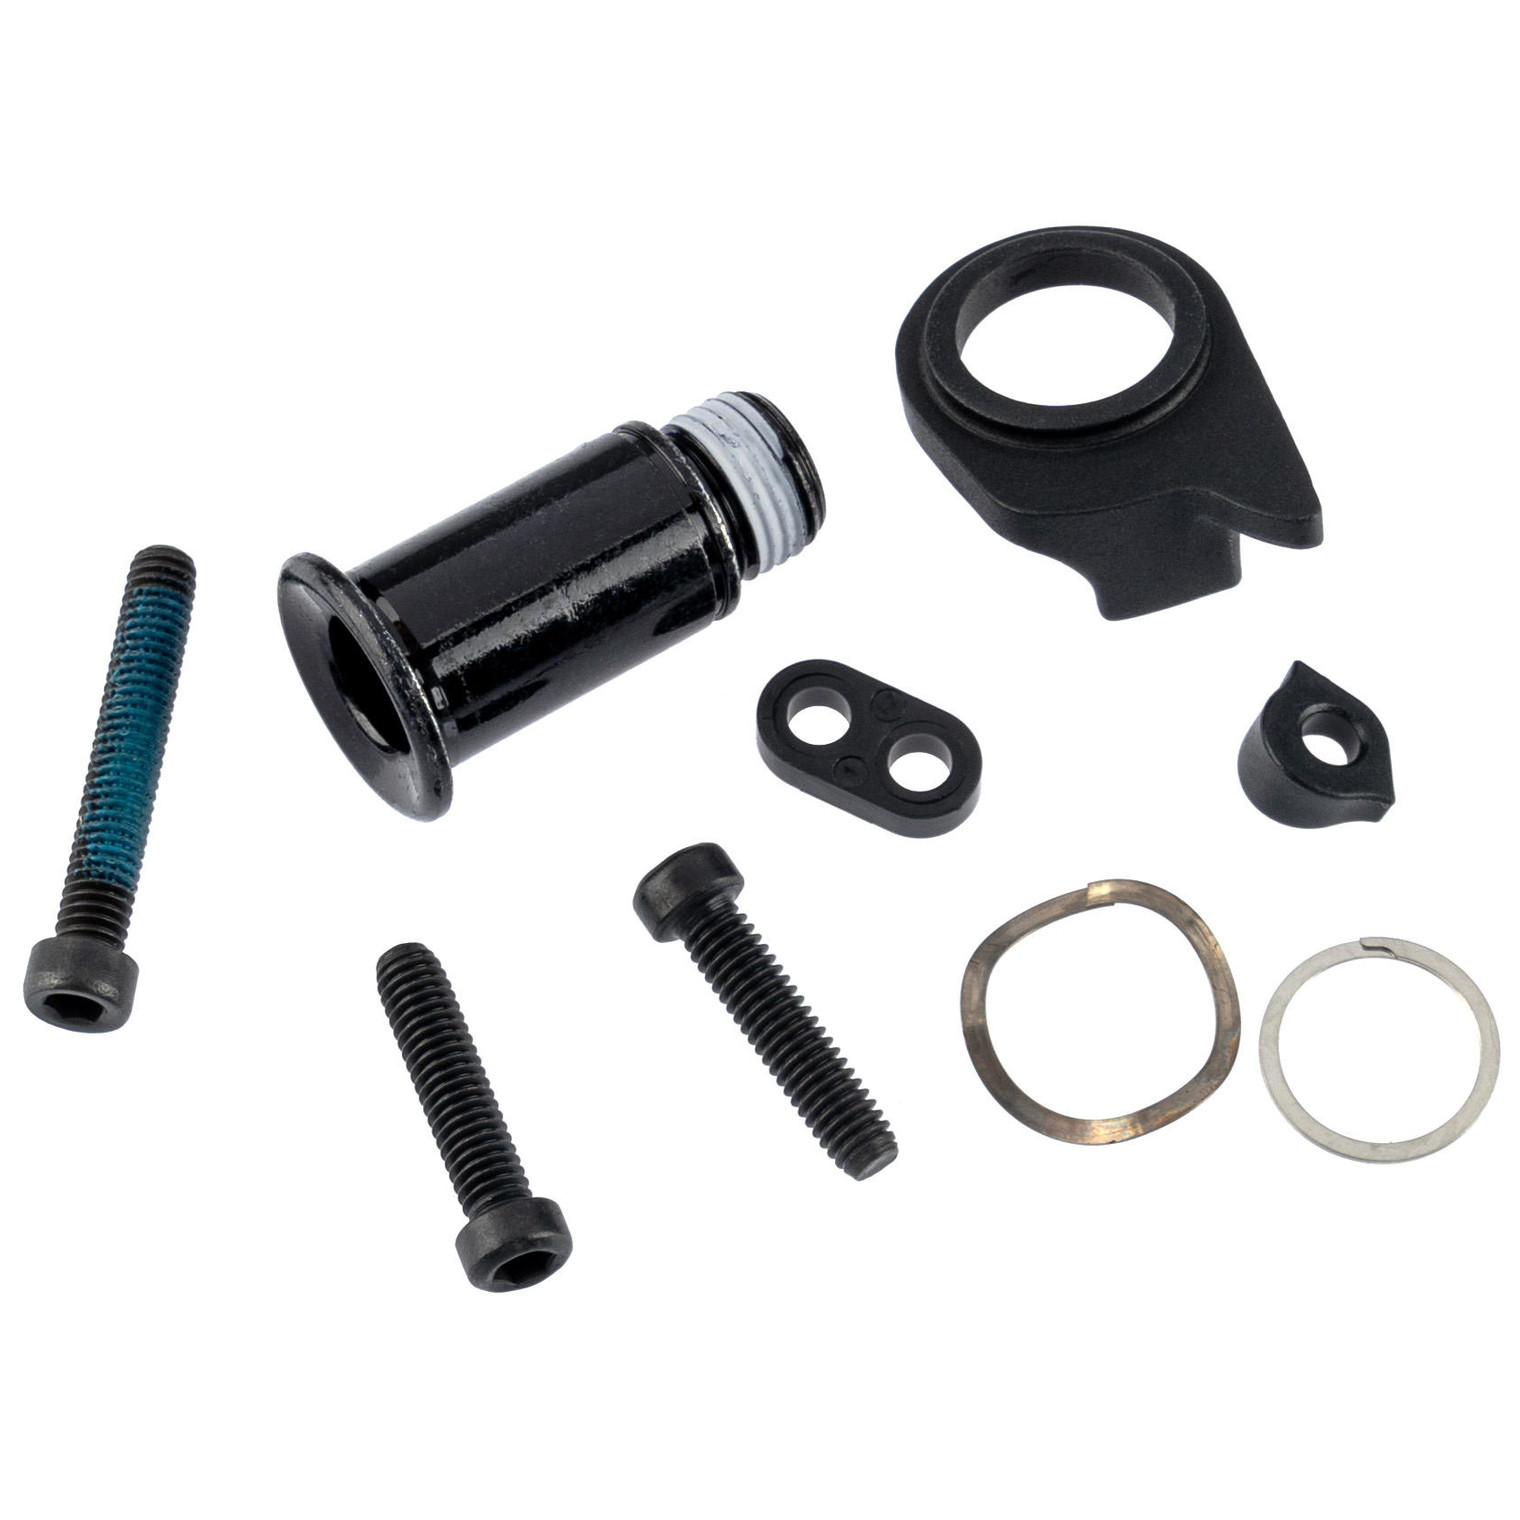 Picture of SRAM Bolt &amp; Screw Kit for GX Eagle (52T) Rear Derailleurs - 11.7518.098.000